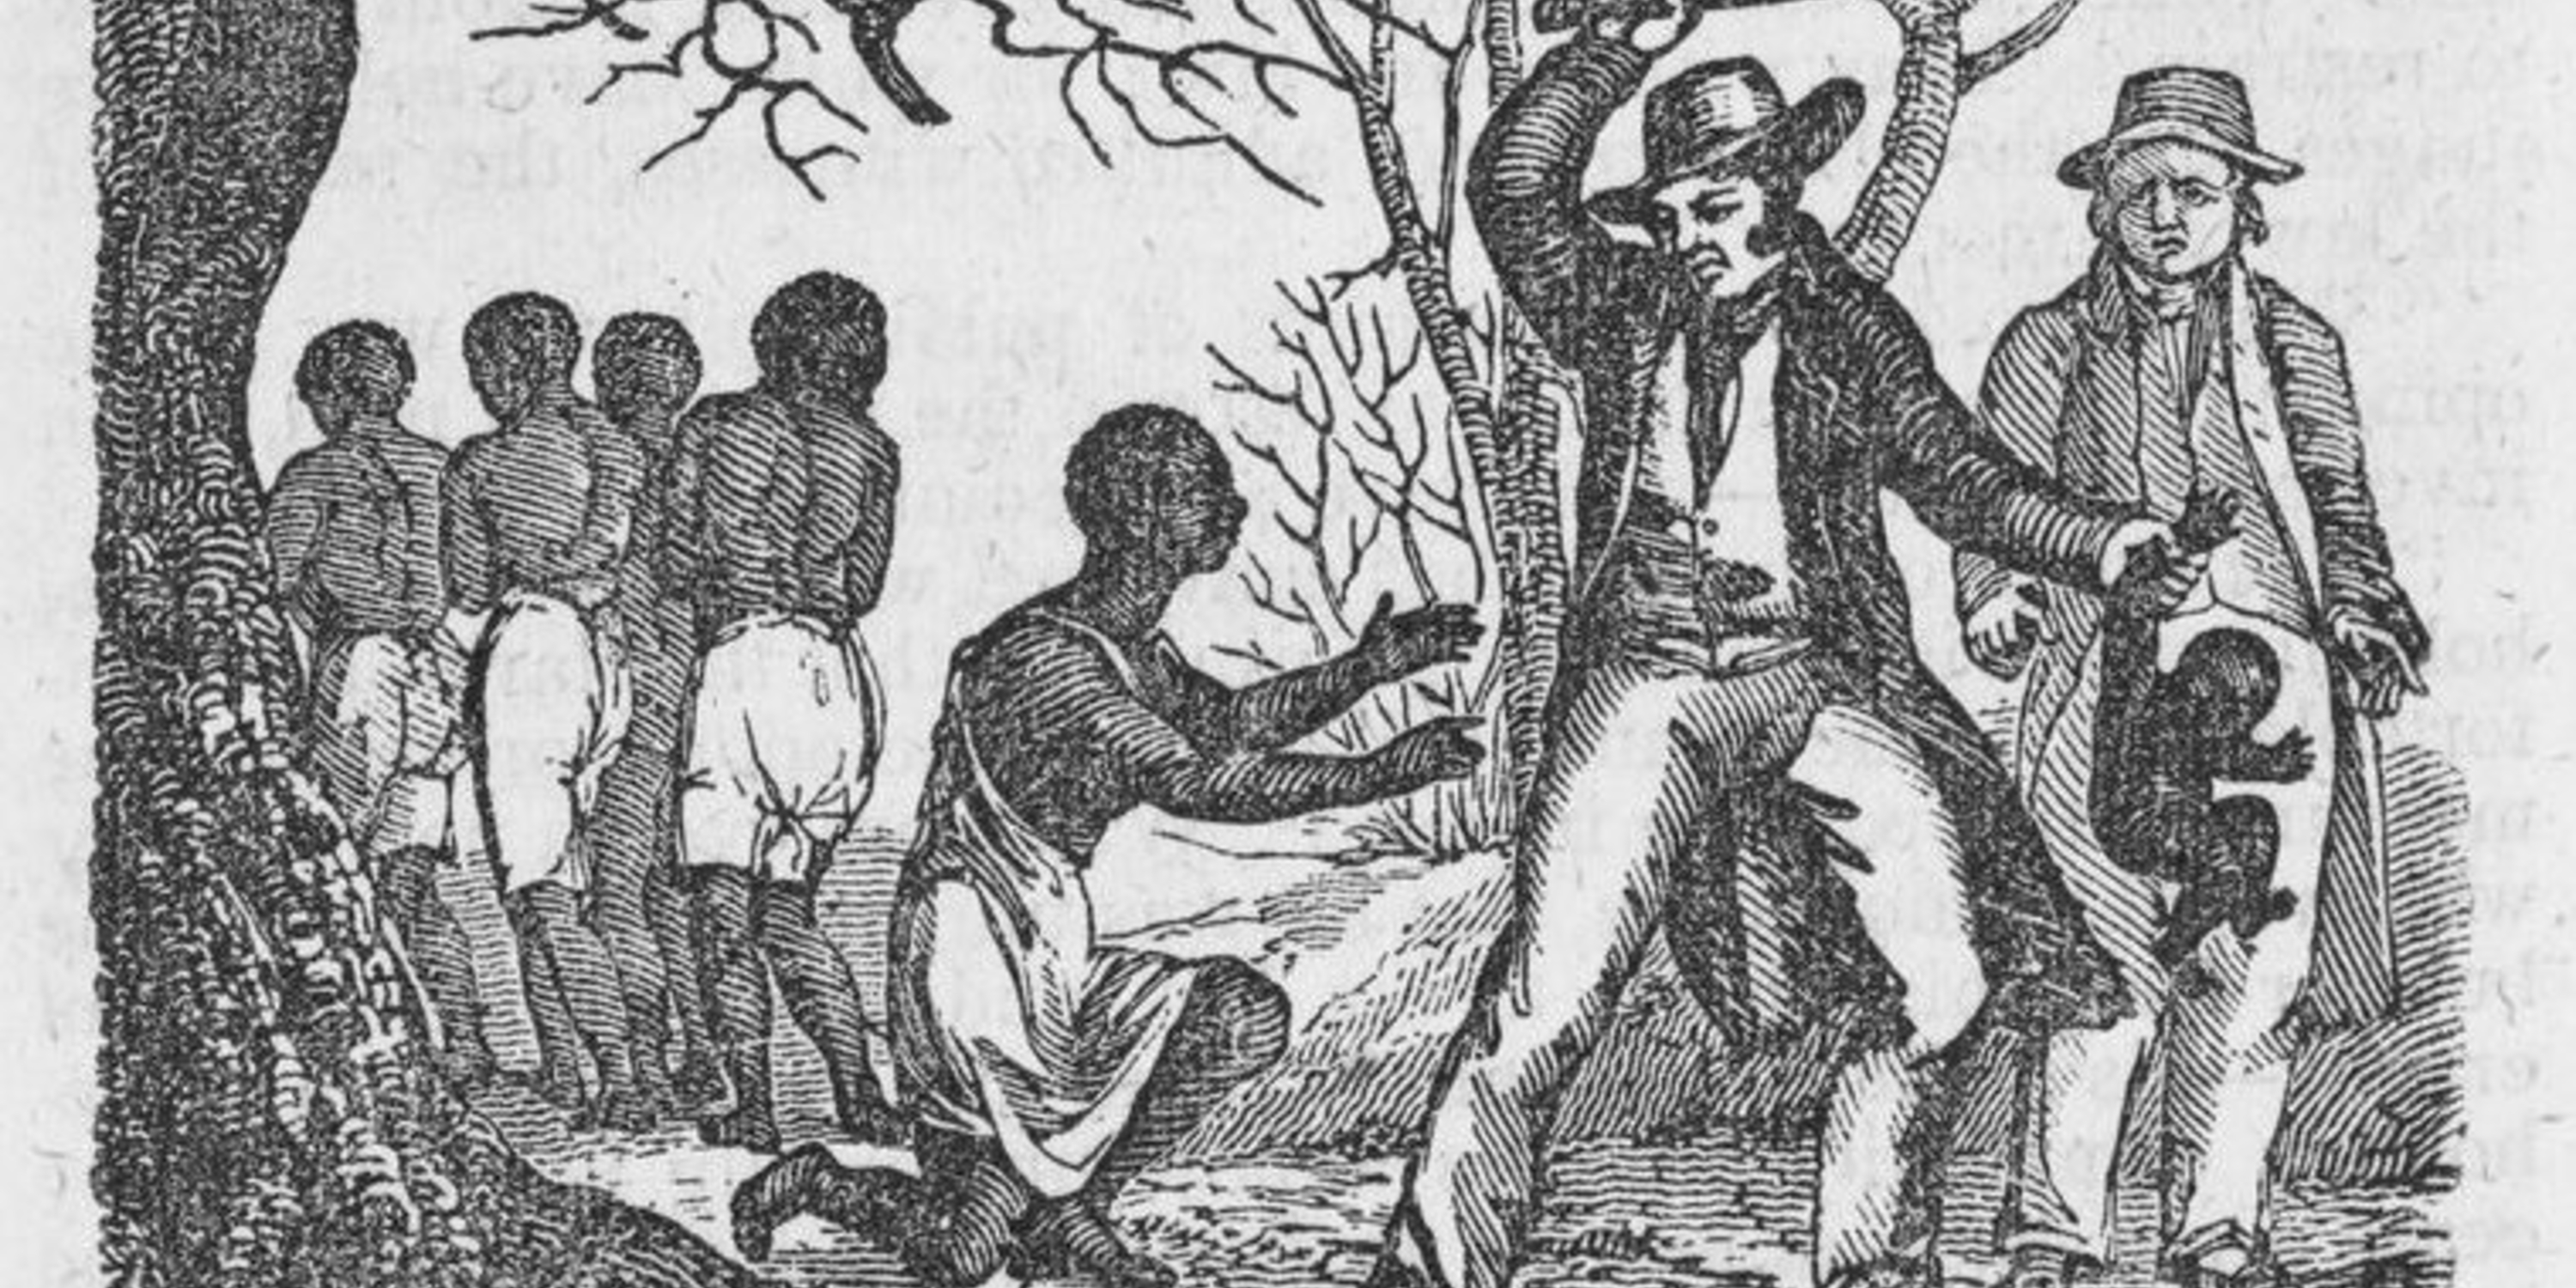 A slave owner holding a baby and a whip and a group of slaves